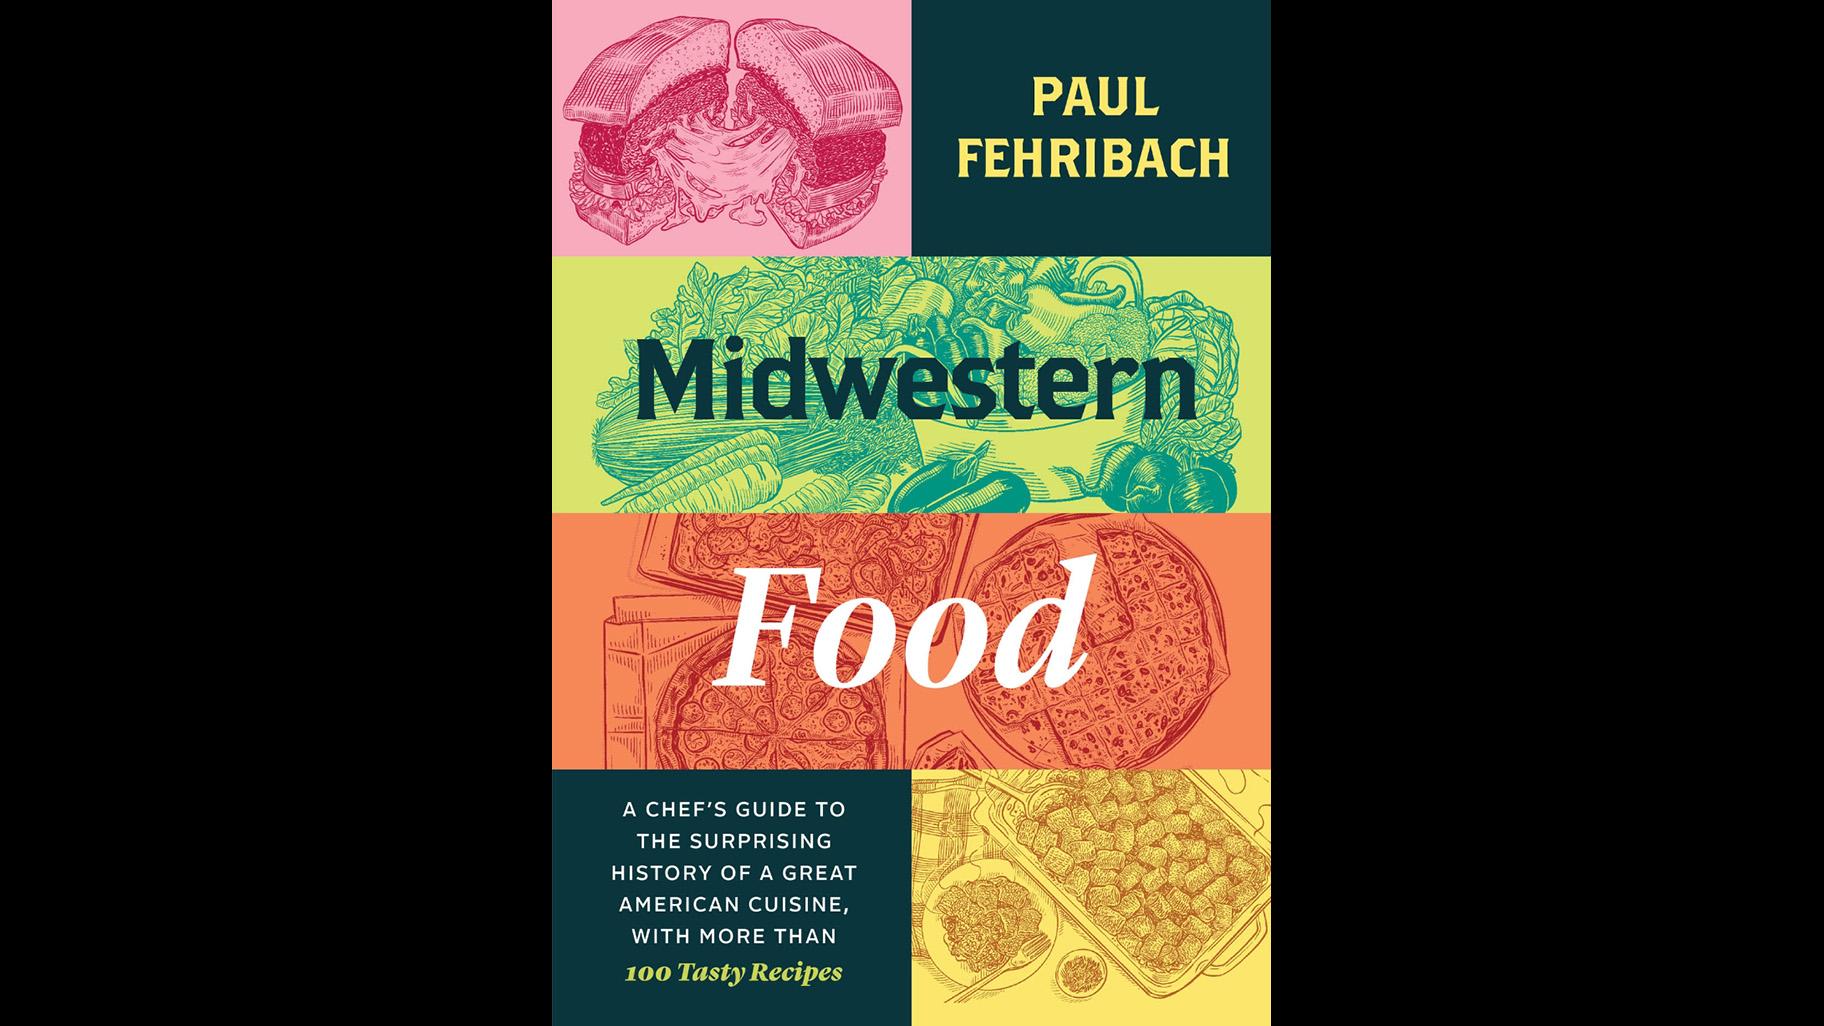 “Midwestern Food: A Chef’s Guide to the Surprising History of a Great American Cuisine” by Paul Fehribach.